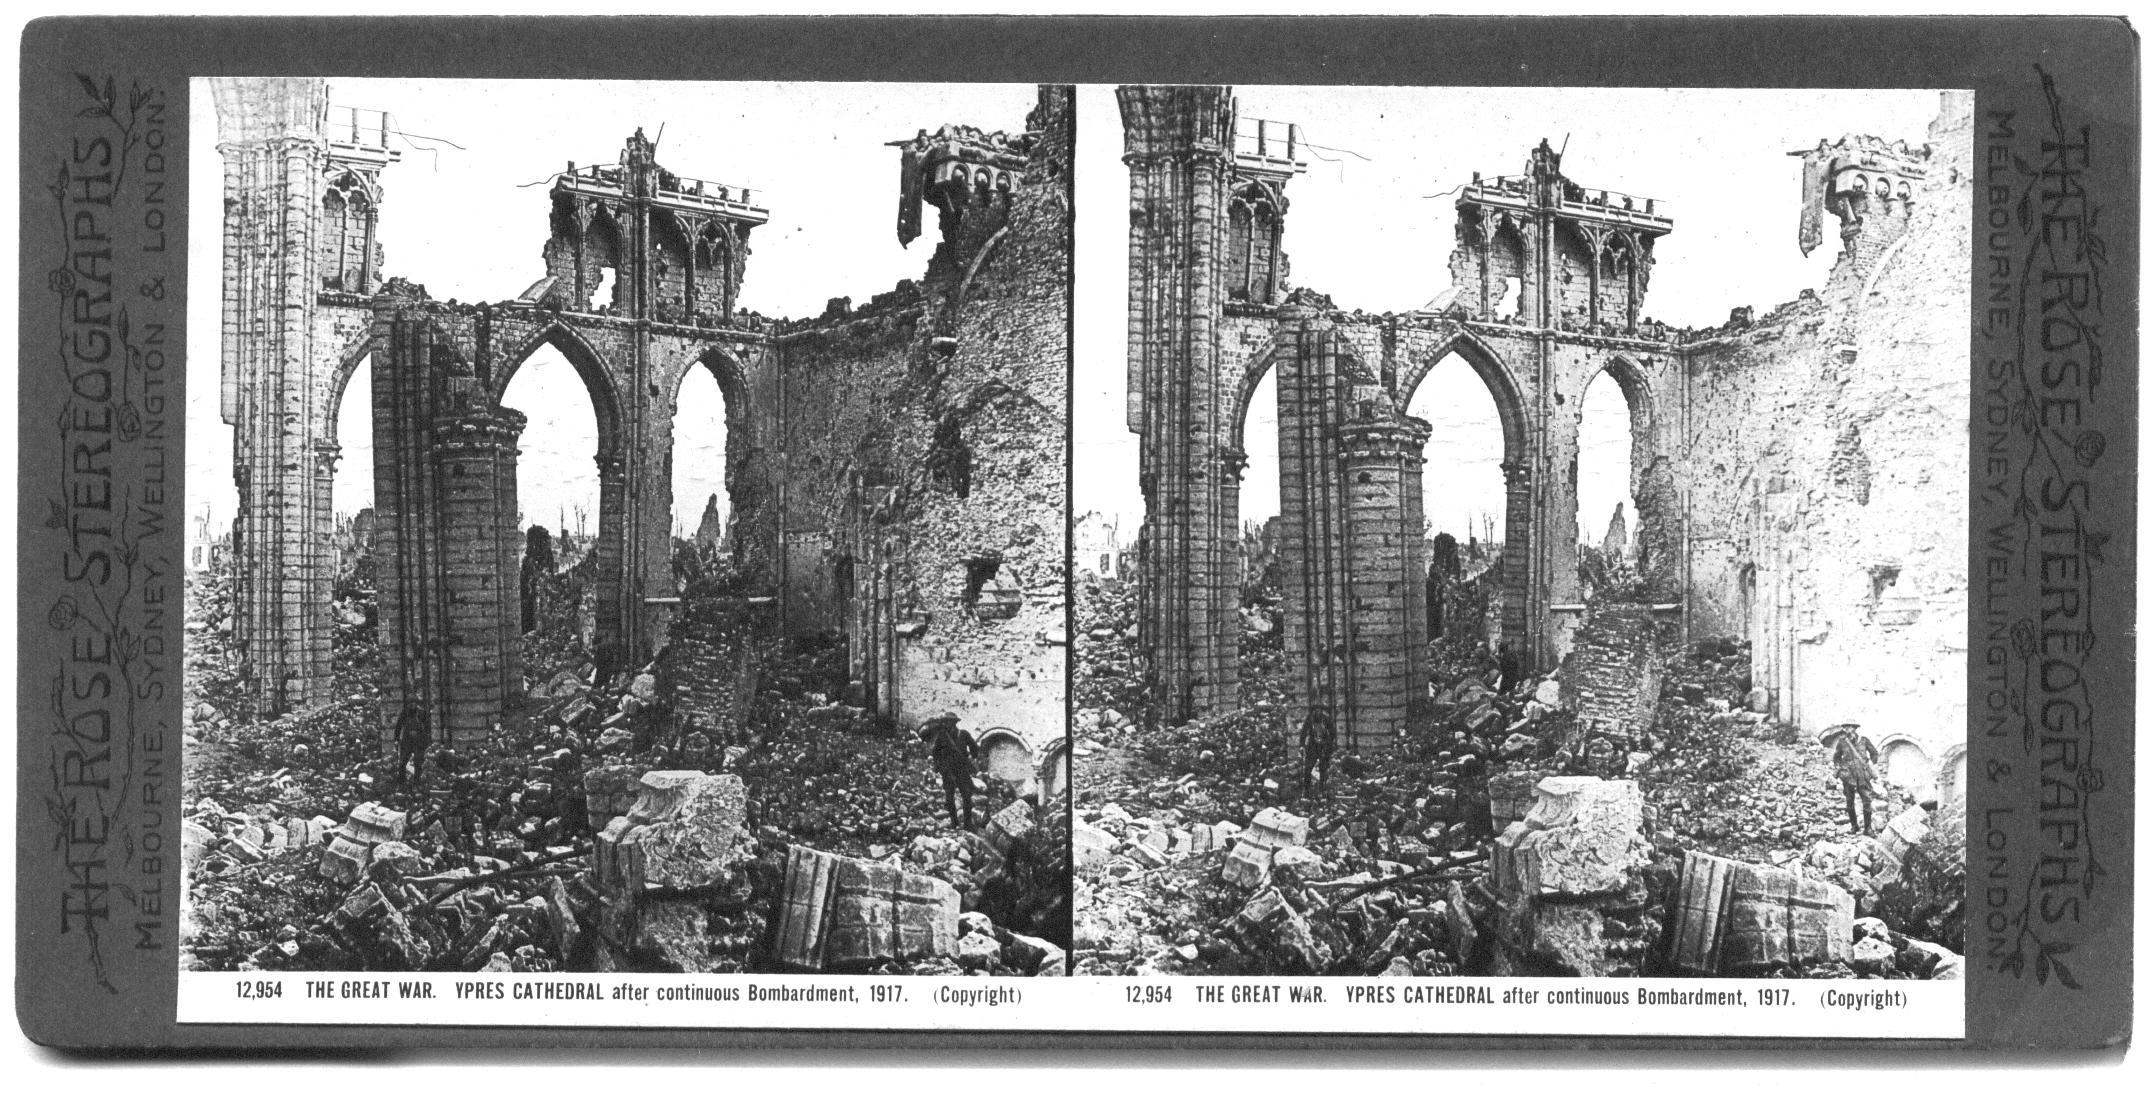 THE GREAT WAR. YPRES CATHEDRAL after continuous Bombardment, 1917.